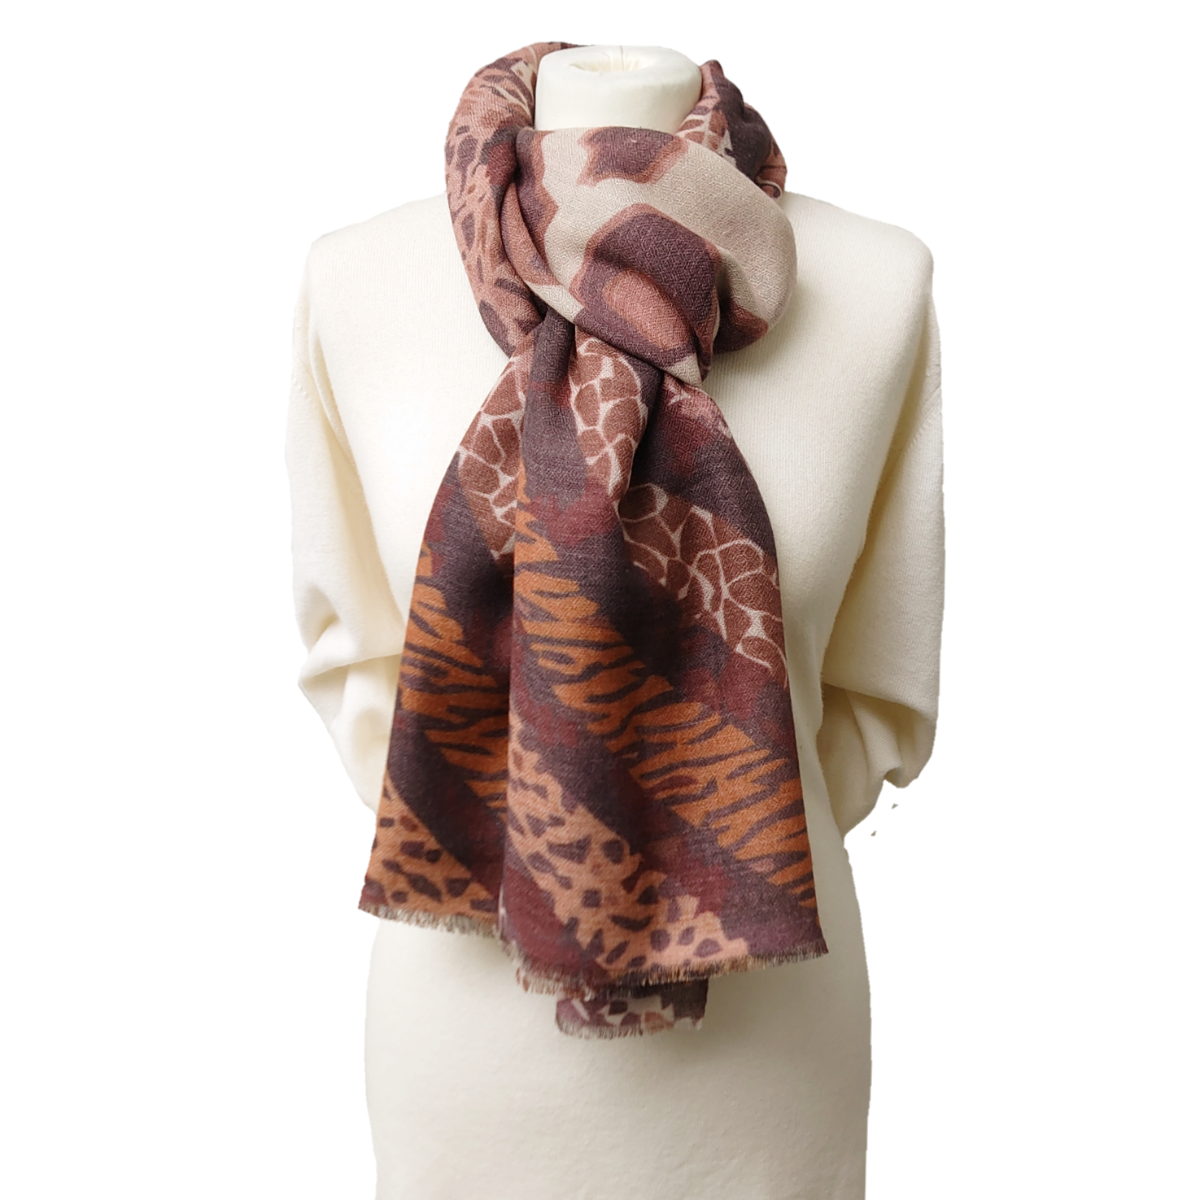 Ltd Edition 100% Pure Pashmina Cashmere Stole - Large Scarf - Abstract Pelts Patterns Print